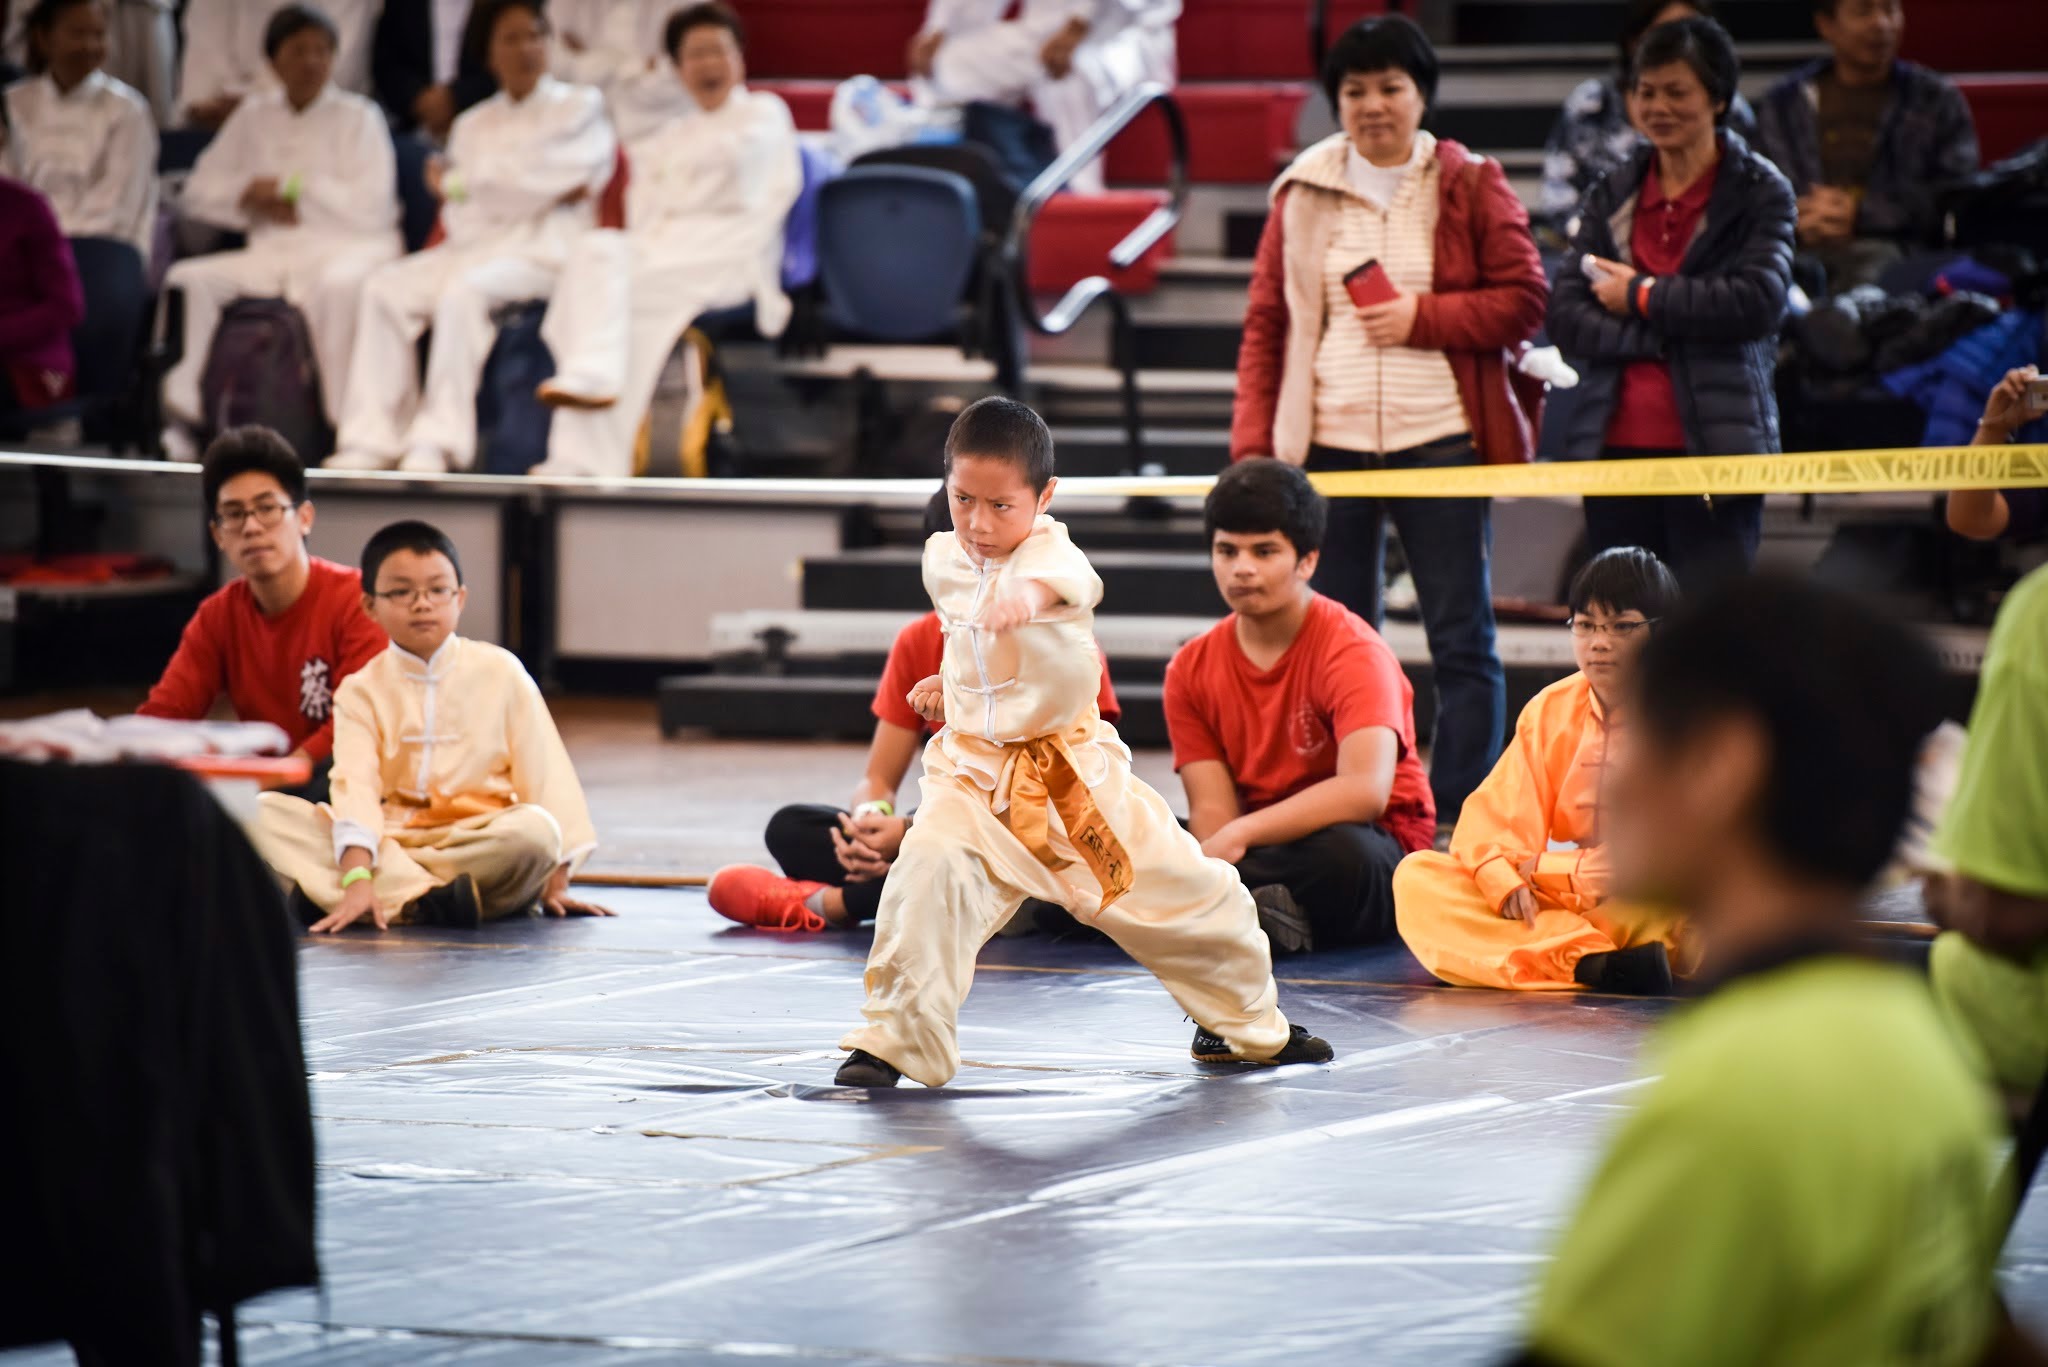 Children's martial arts forms performed at The US Open Martial Arts Championship